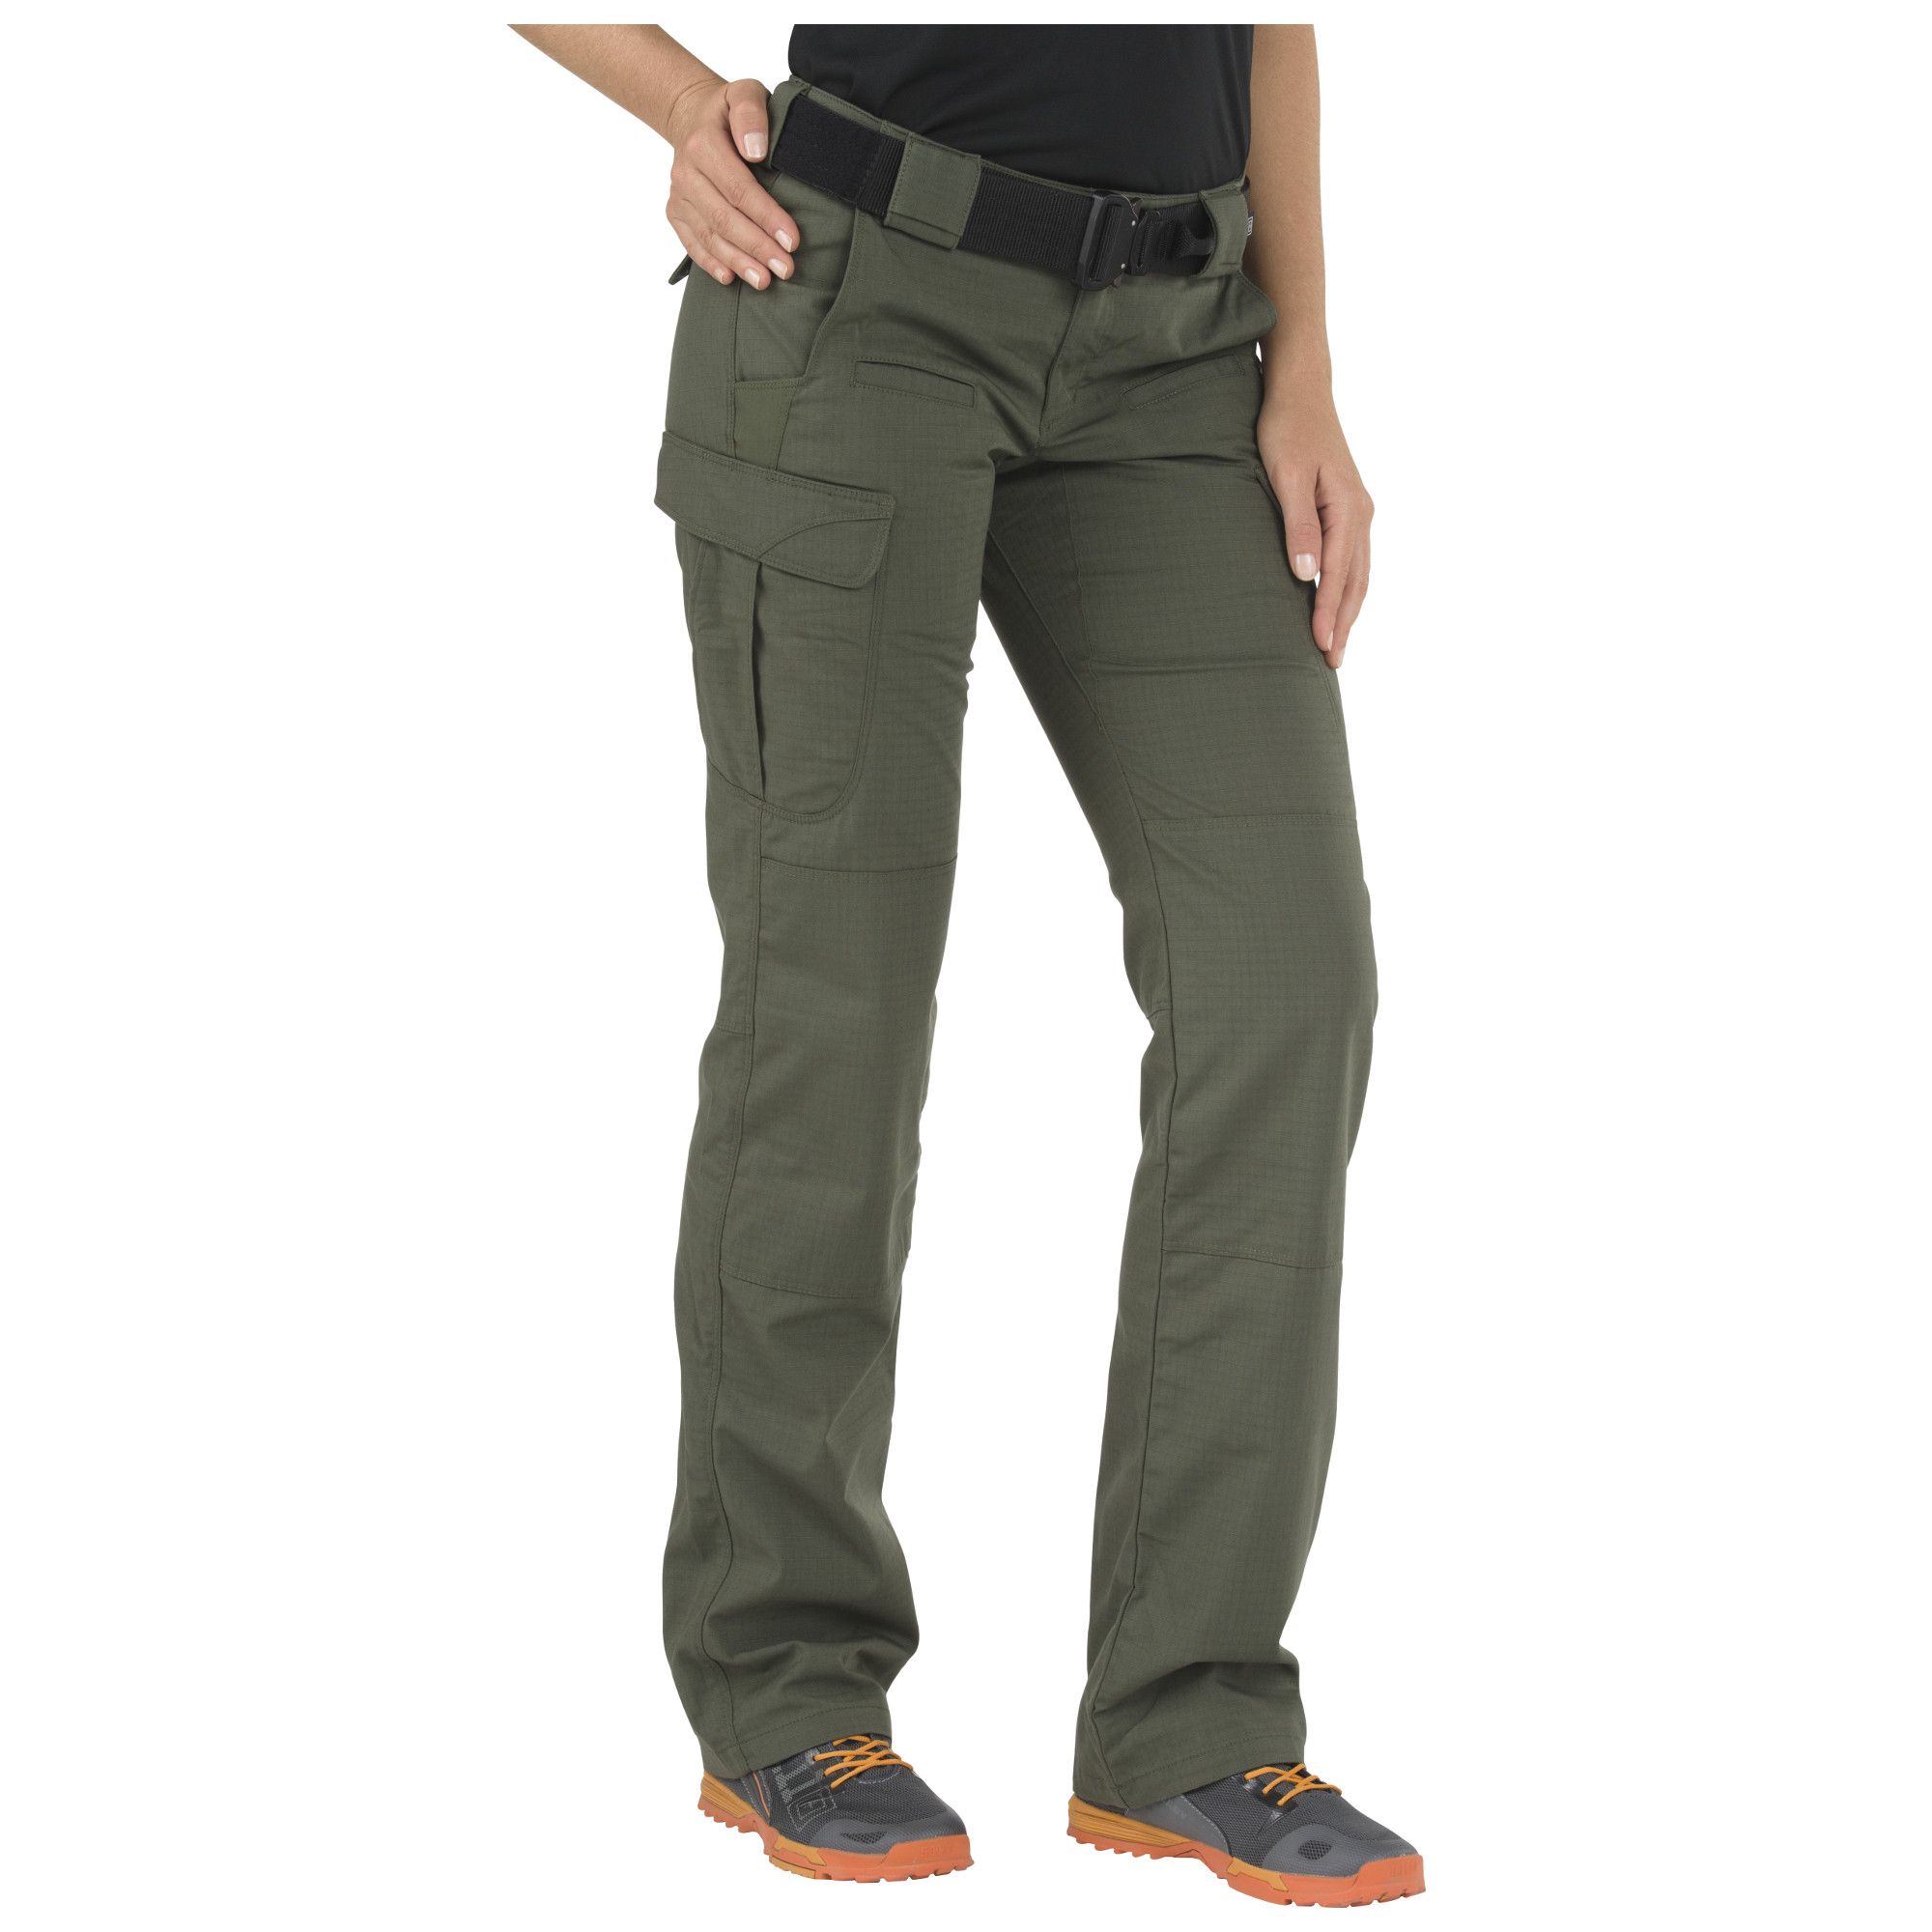 5.11® Tactical Women's Stryke™ Pants with Flex-Tac® | Cabela's Canada